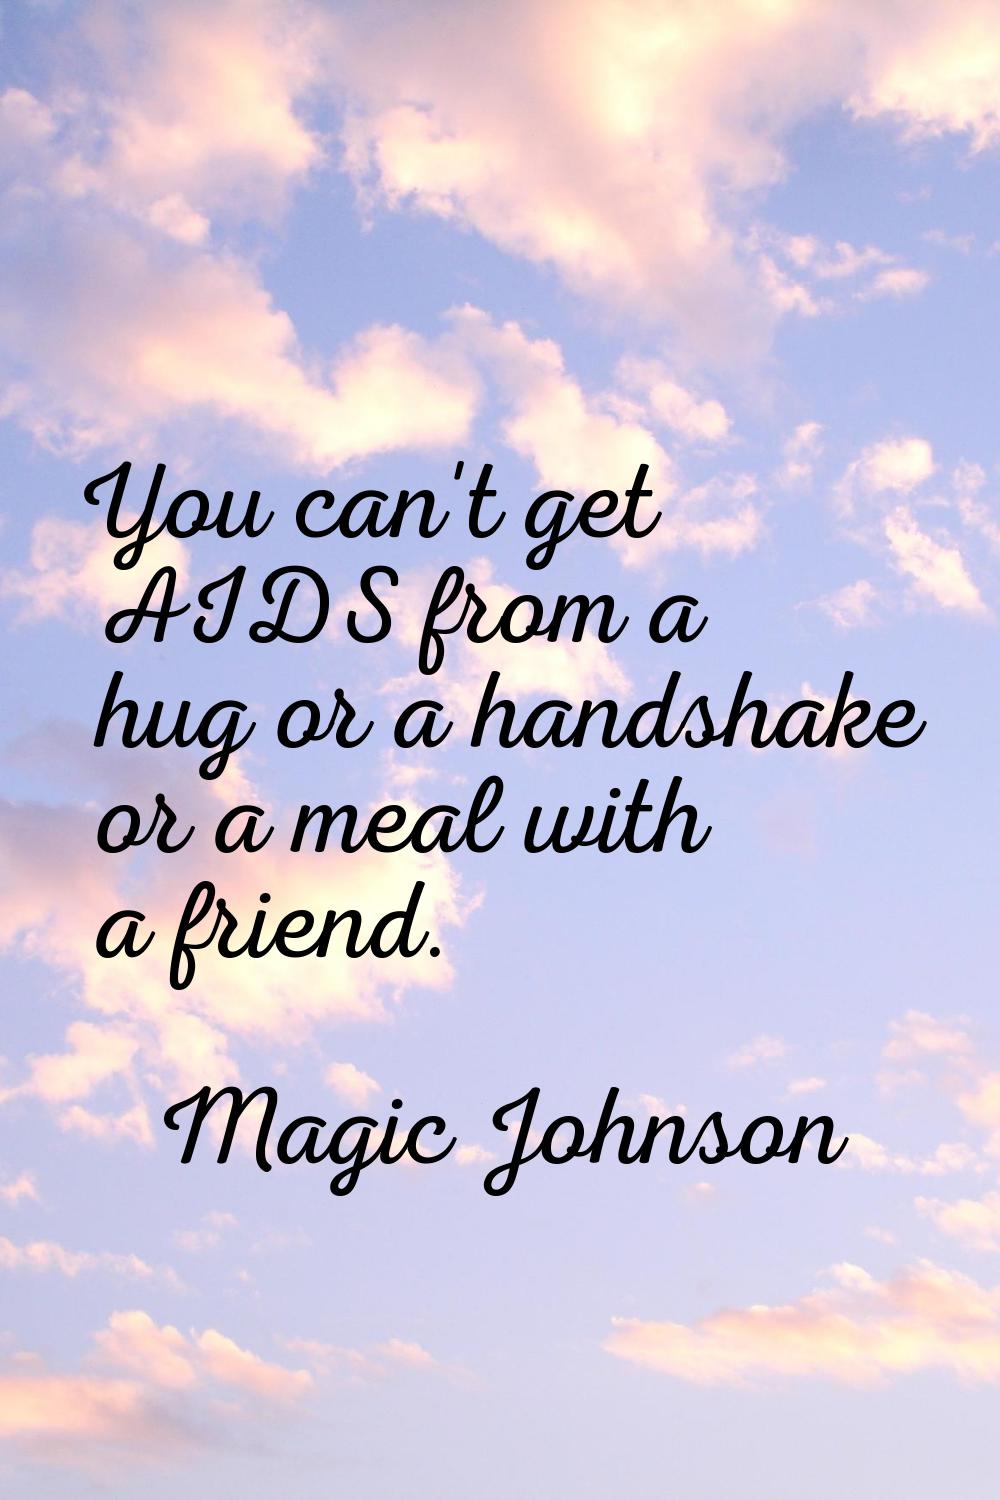 You can't get AIDS from a hug or a handshake or a meal with a friend.